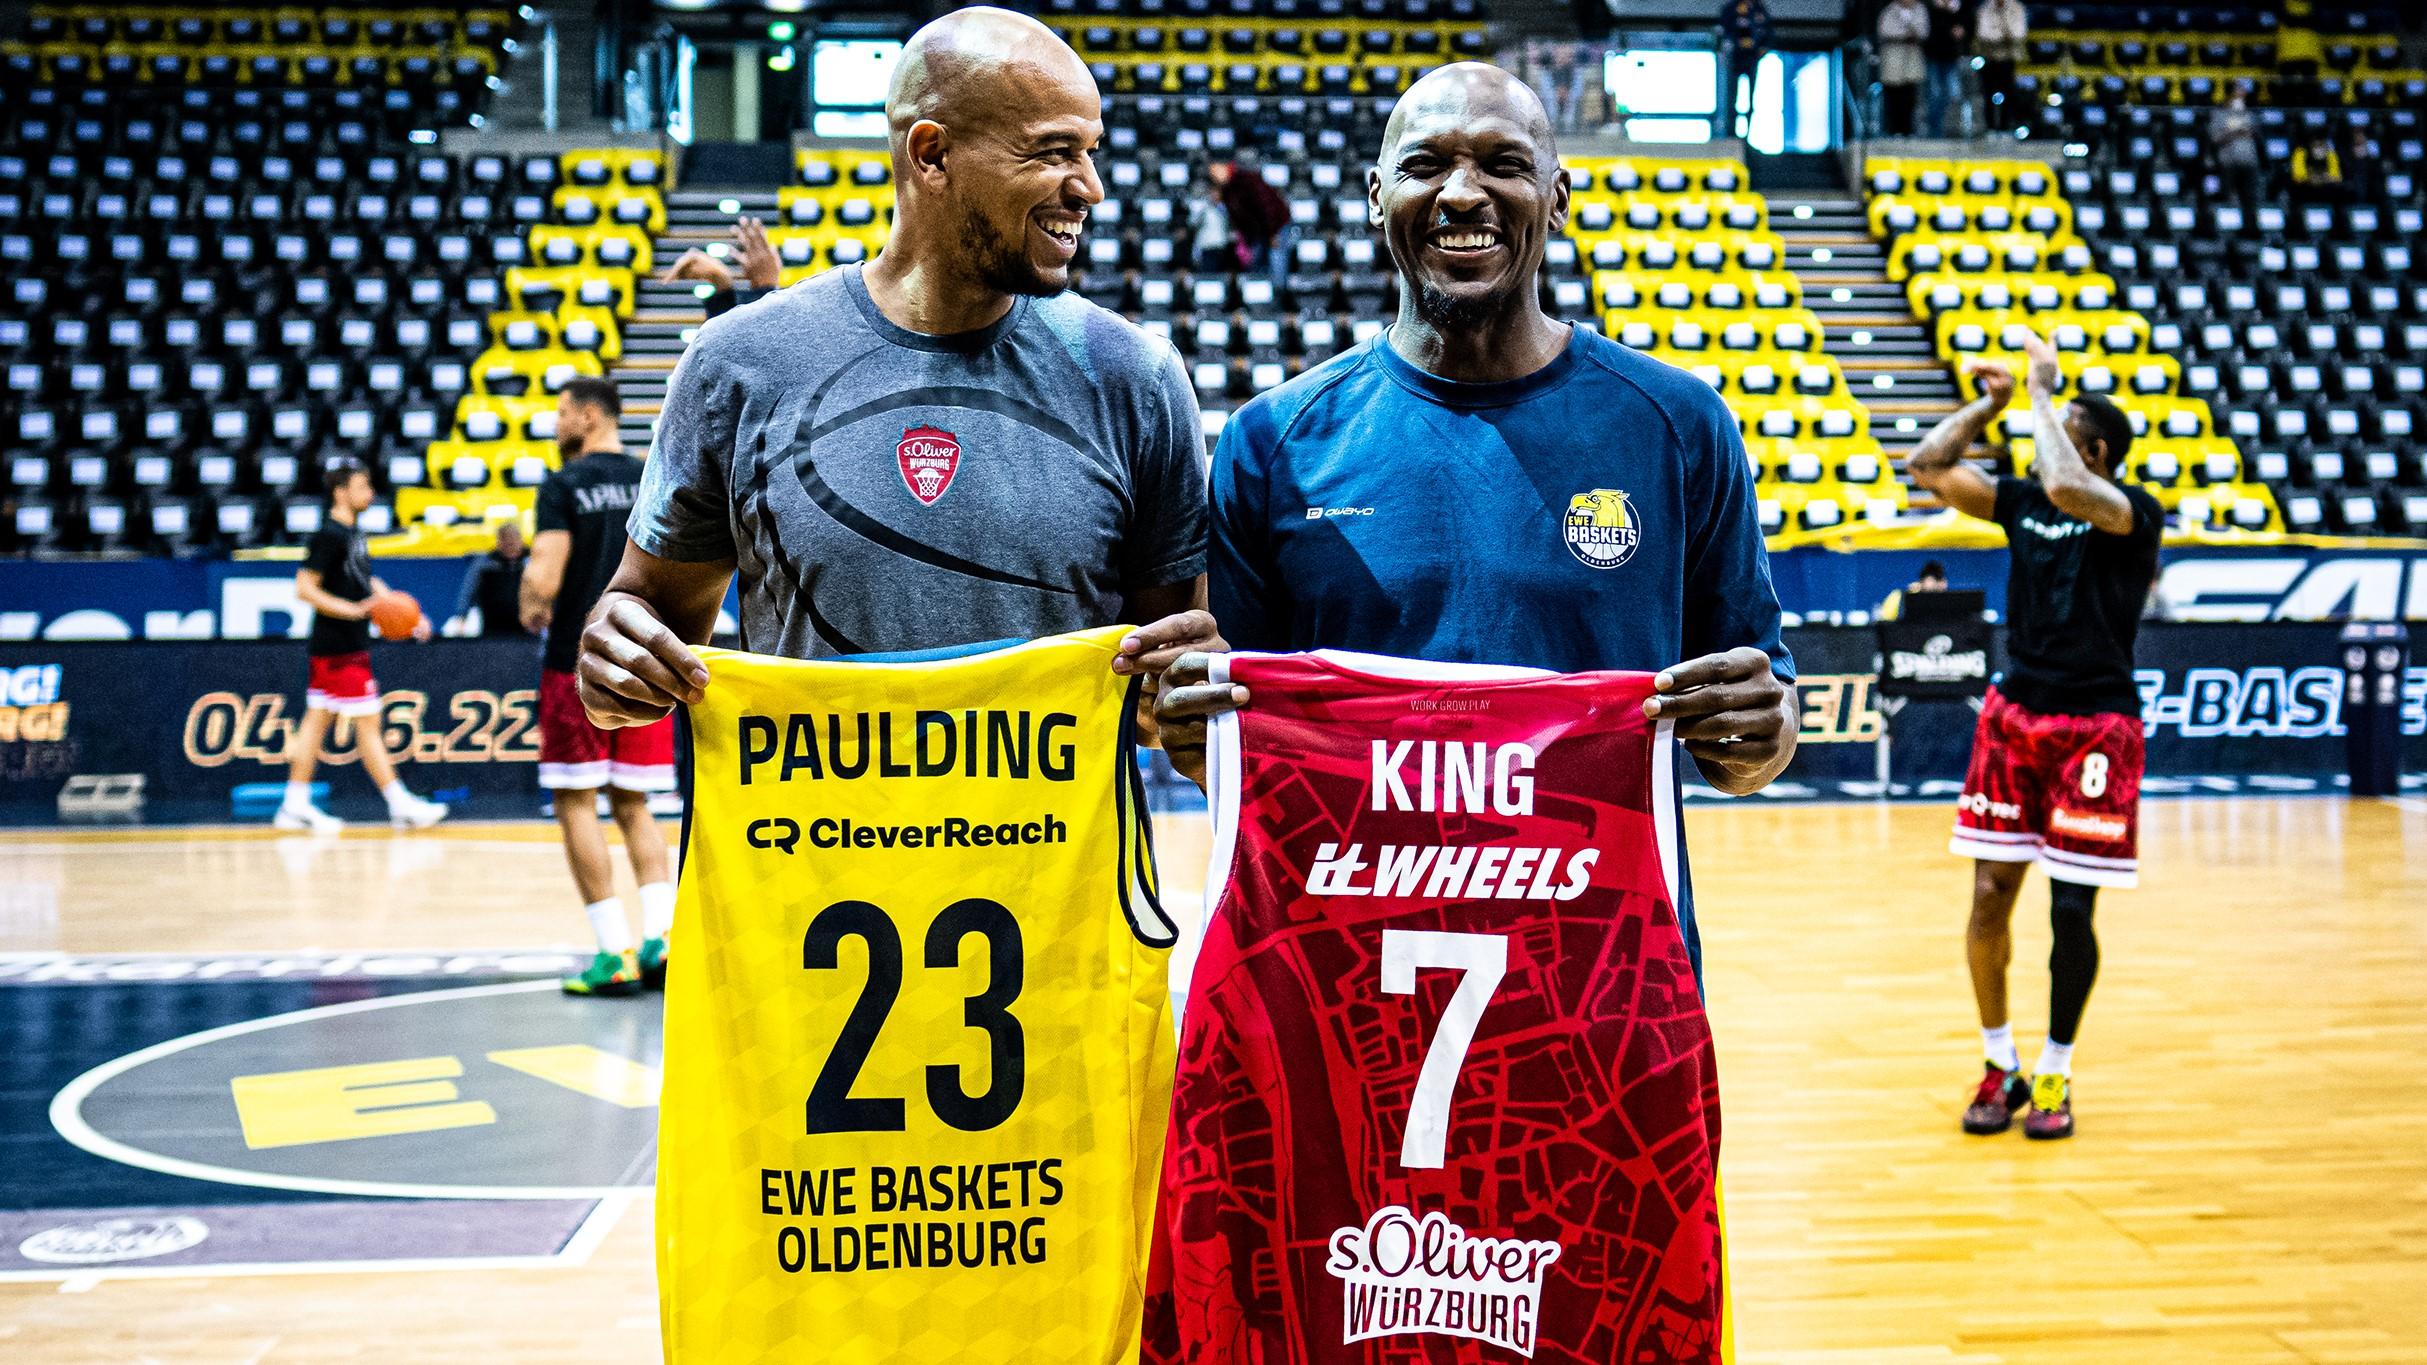 The second relegated team is set as JobStairs GIESSEN 46ers will be sent to the ProA for next season. The easyCredit BBL will also be without two legends in 2022-23 as Rickey Paulding and Alex King both played their final games in the league. The playoffs picture is just about clear in terms of which teams will be playing as Brose Bamberg keep up their charge to make the post-season and two-time reigning champs ALBA BERLIN are mounting major pressure to grab the regular season title and home court advantage in the playoffs. More hardware was handed out as well as Telekom Baskets Bonn’s Parker Jackson-Cartwright was named Most Valuable Player, the team’s head coach Tuomas Iisalo as Coach of the Year and Justus Hollatz of Hamburg Towers named Best German Youth (U22) Player.